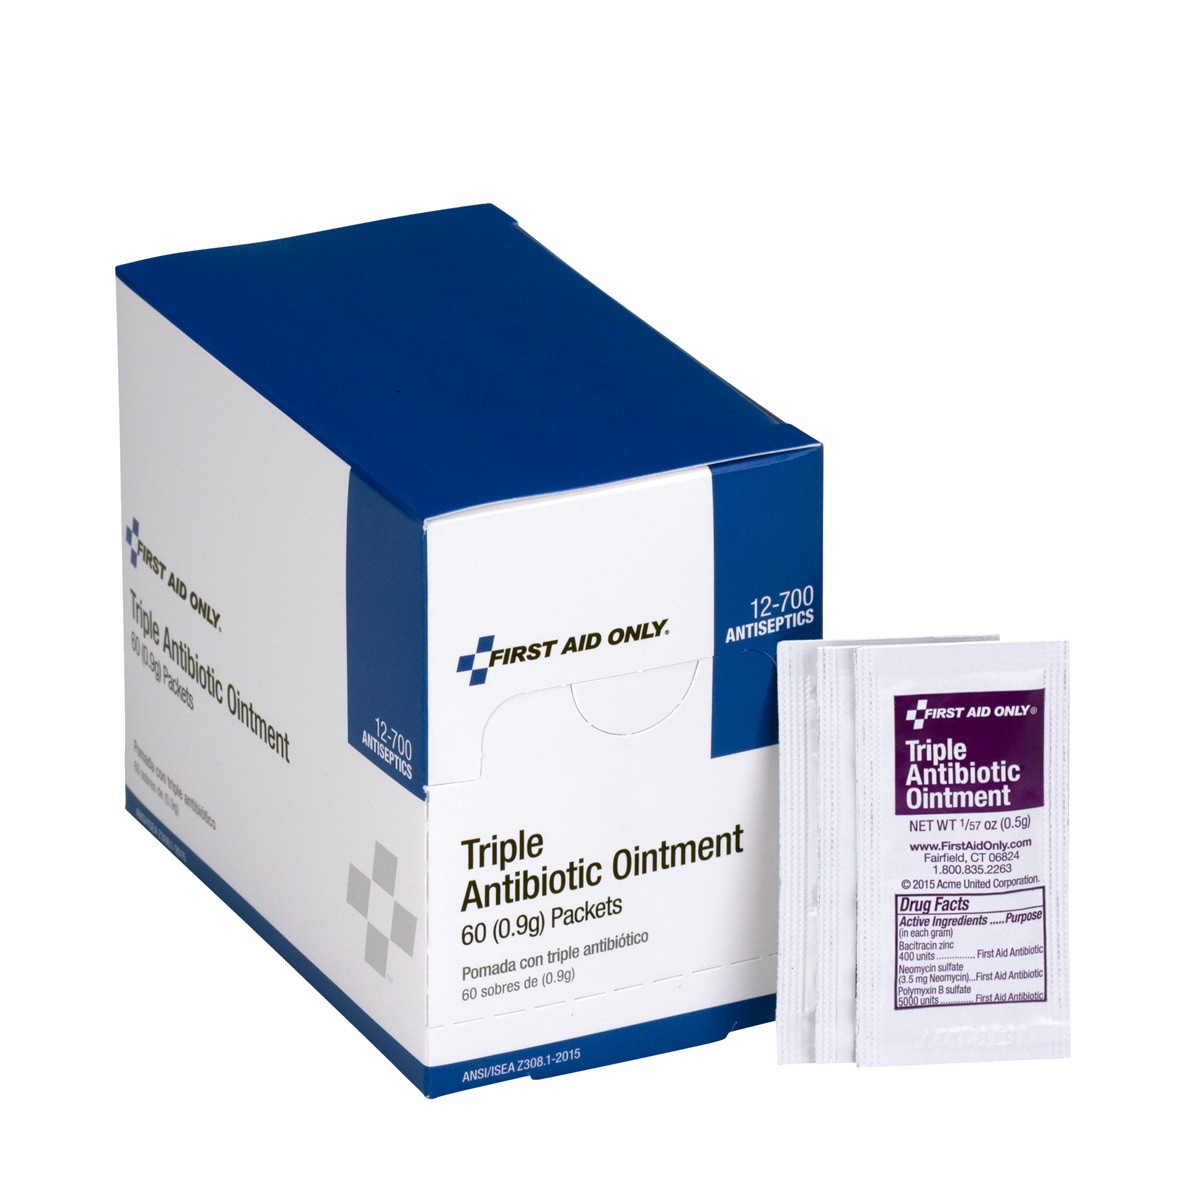 Triple Antibiotic Ointment (0.9g) Packets - First Aid Safety